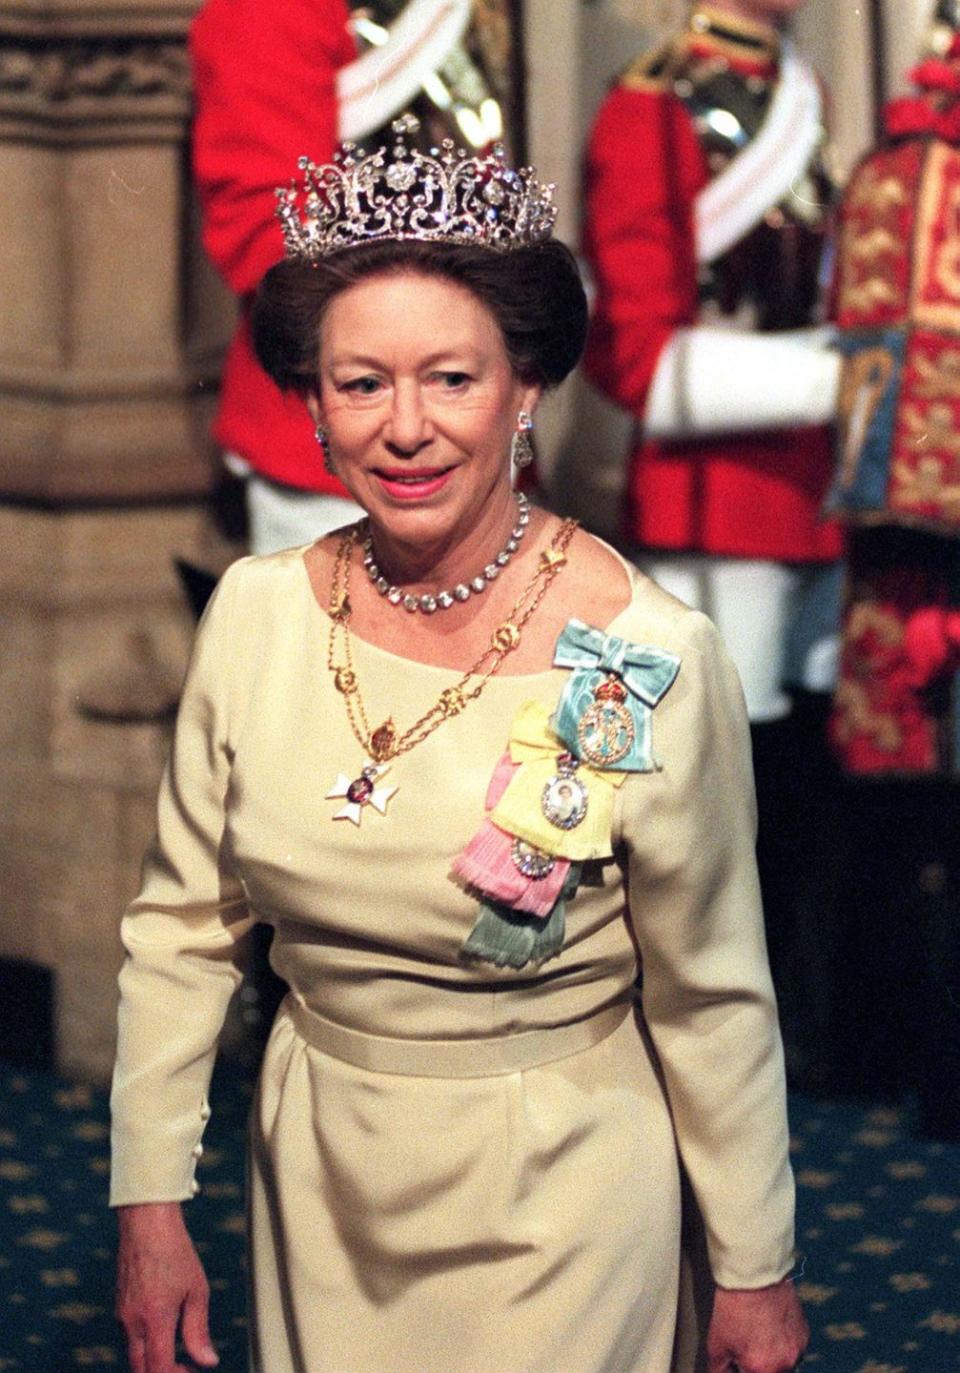 A Look Back at Princess Margaret's Most Iconic Fashion Moments